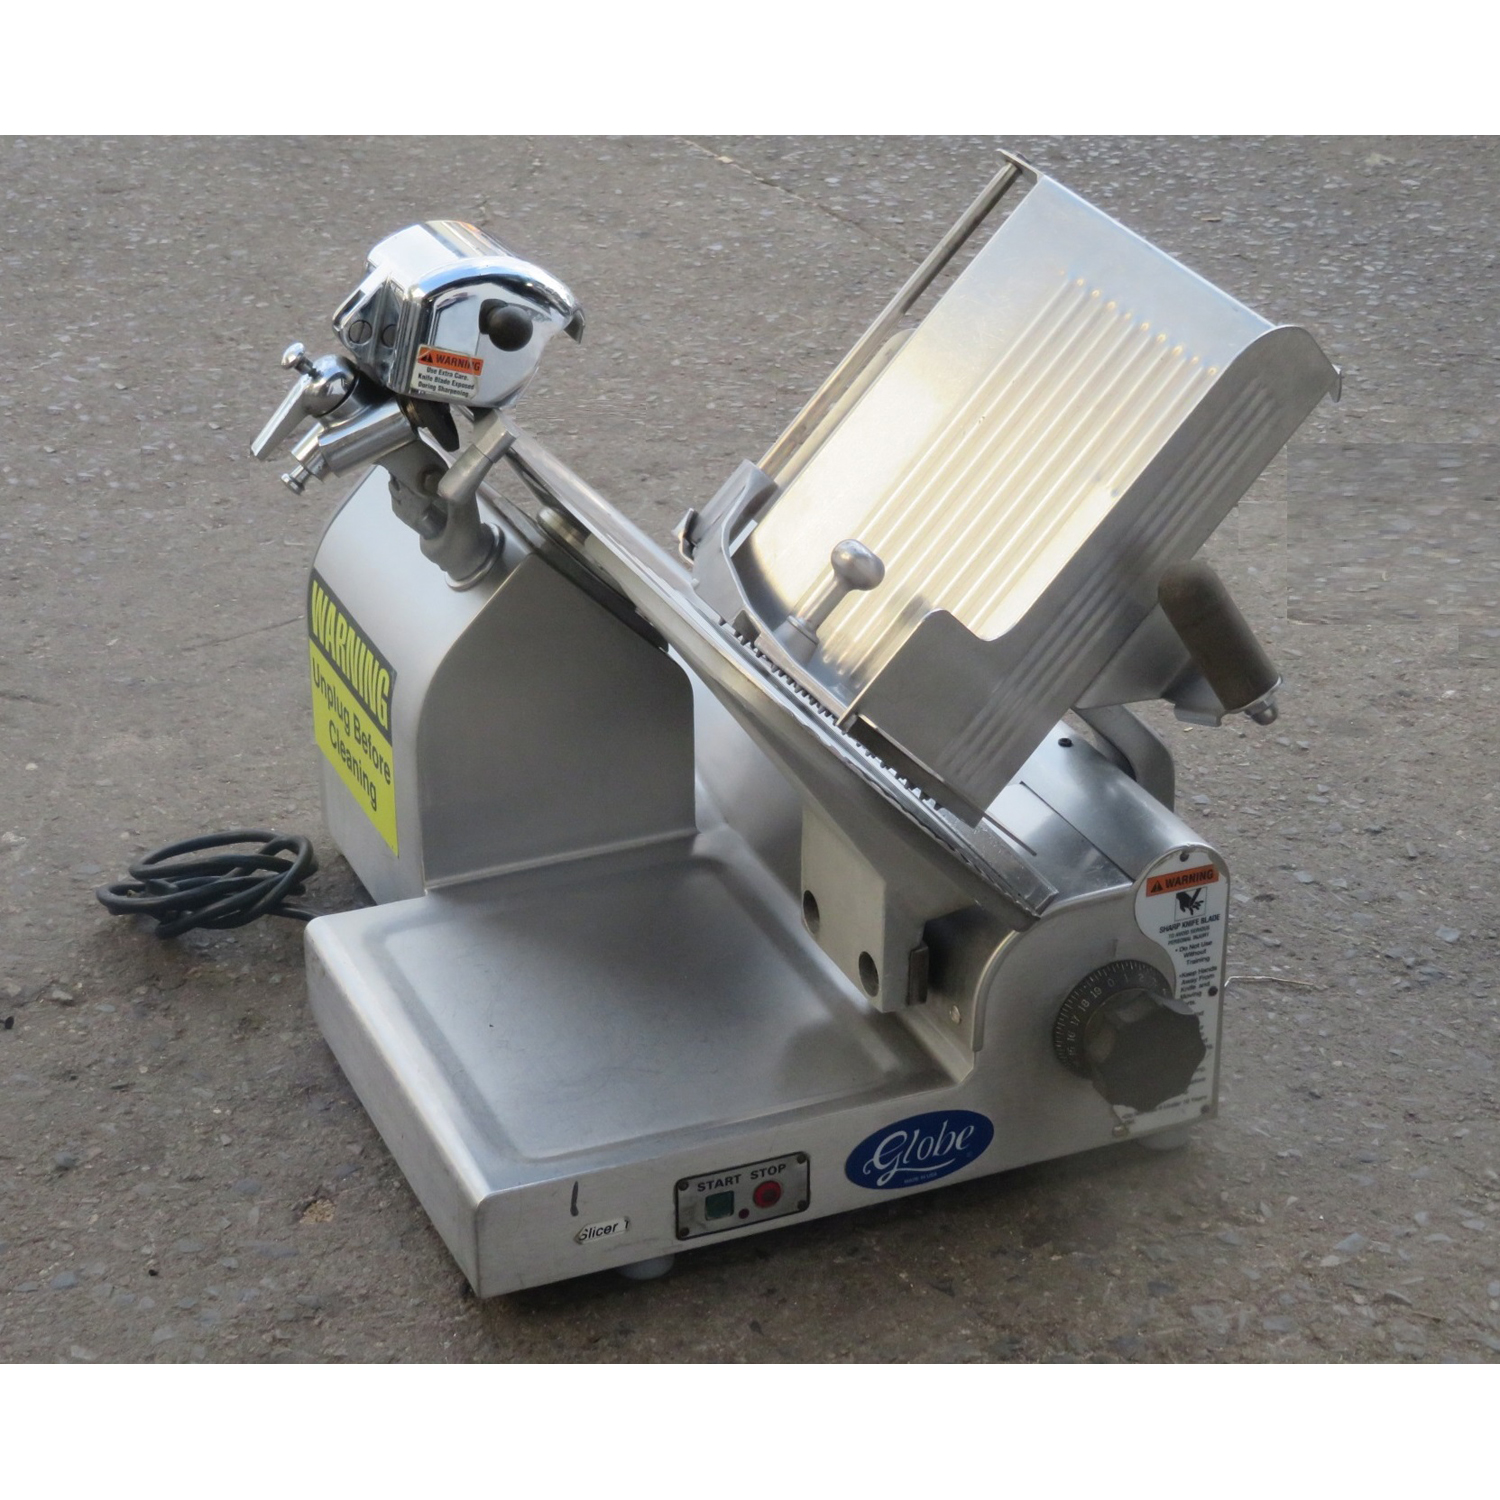 Globe 3600 Meat Slicer, Used Excellent Condition